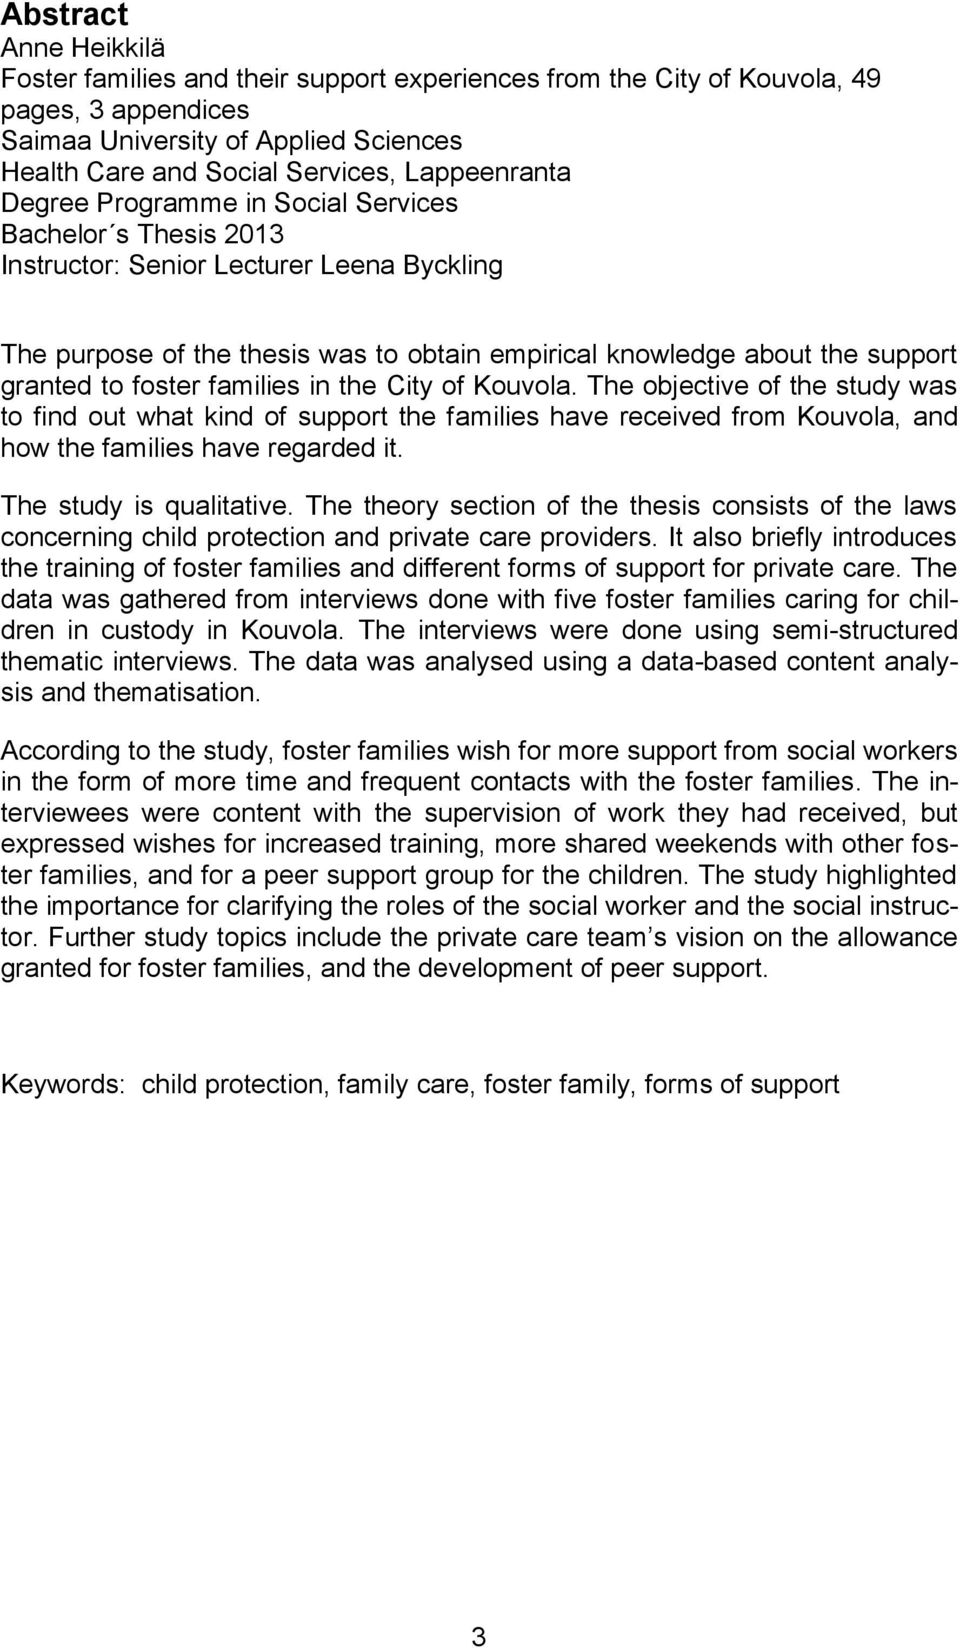 granted to foster families in the City of Kouvola. The objective of the study was to find out what kind of support the families have received from Kouvola, and how the families have regarded it.